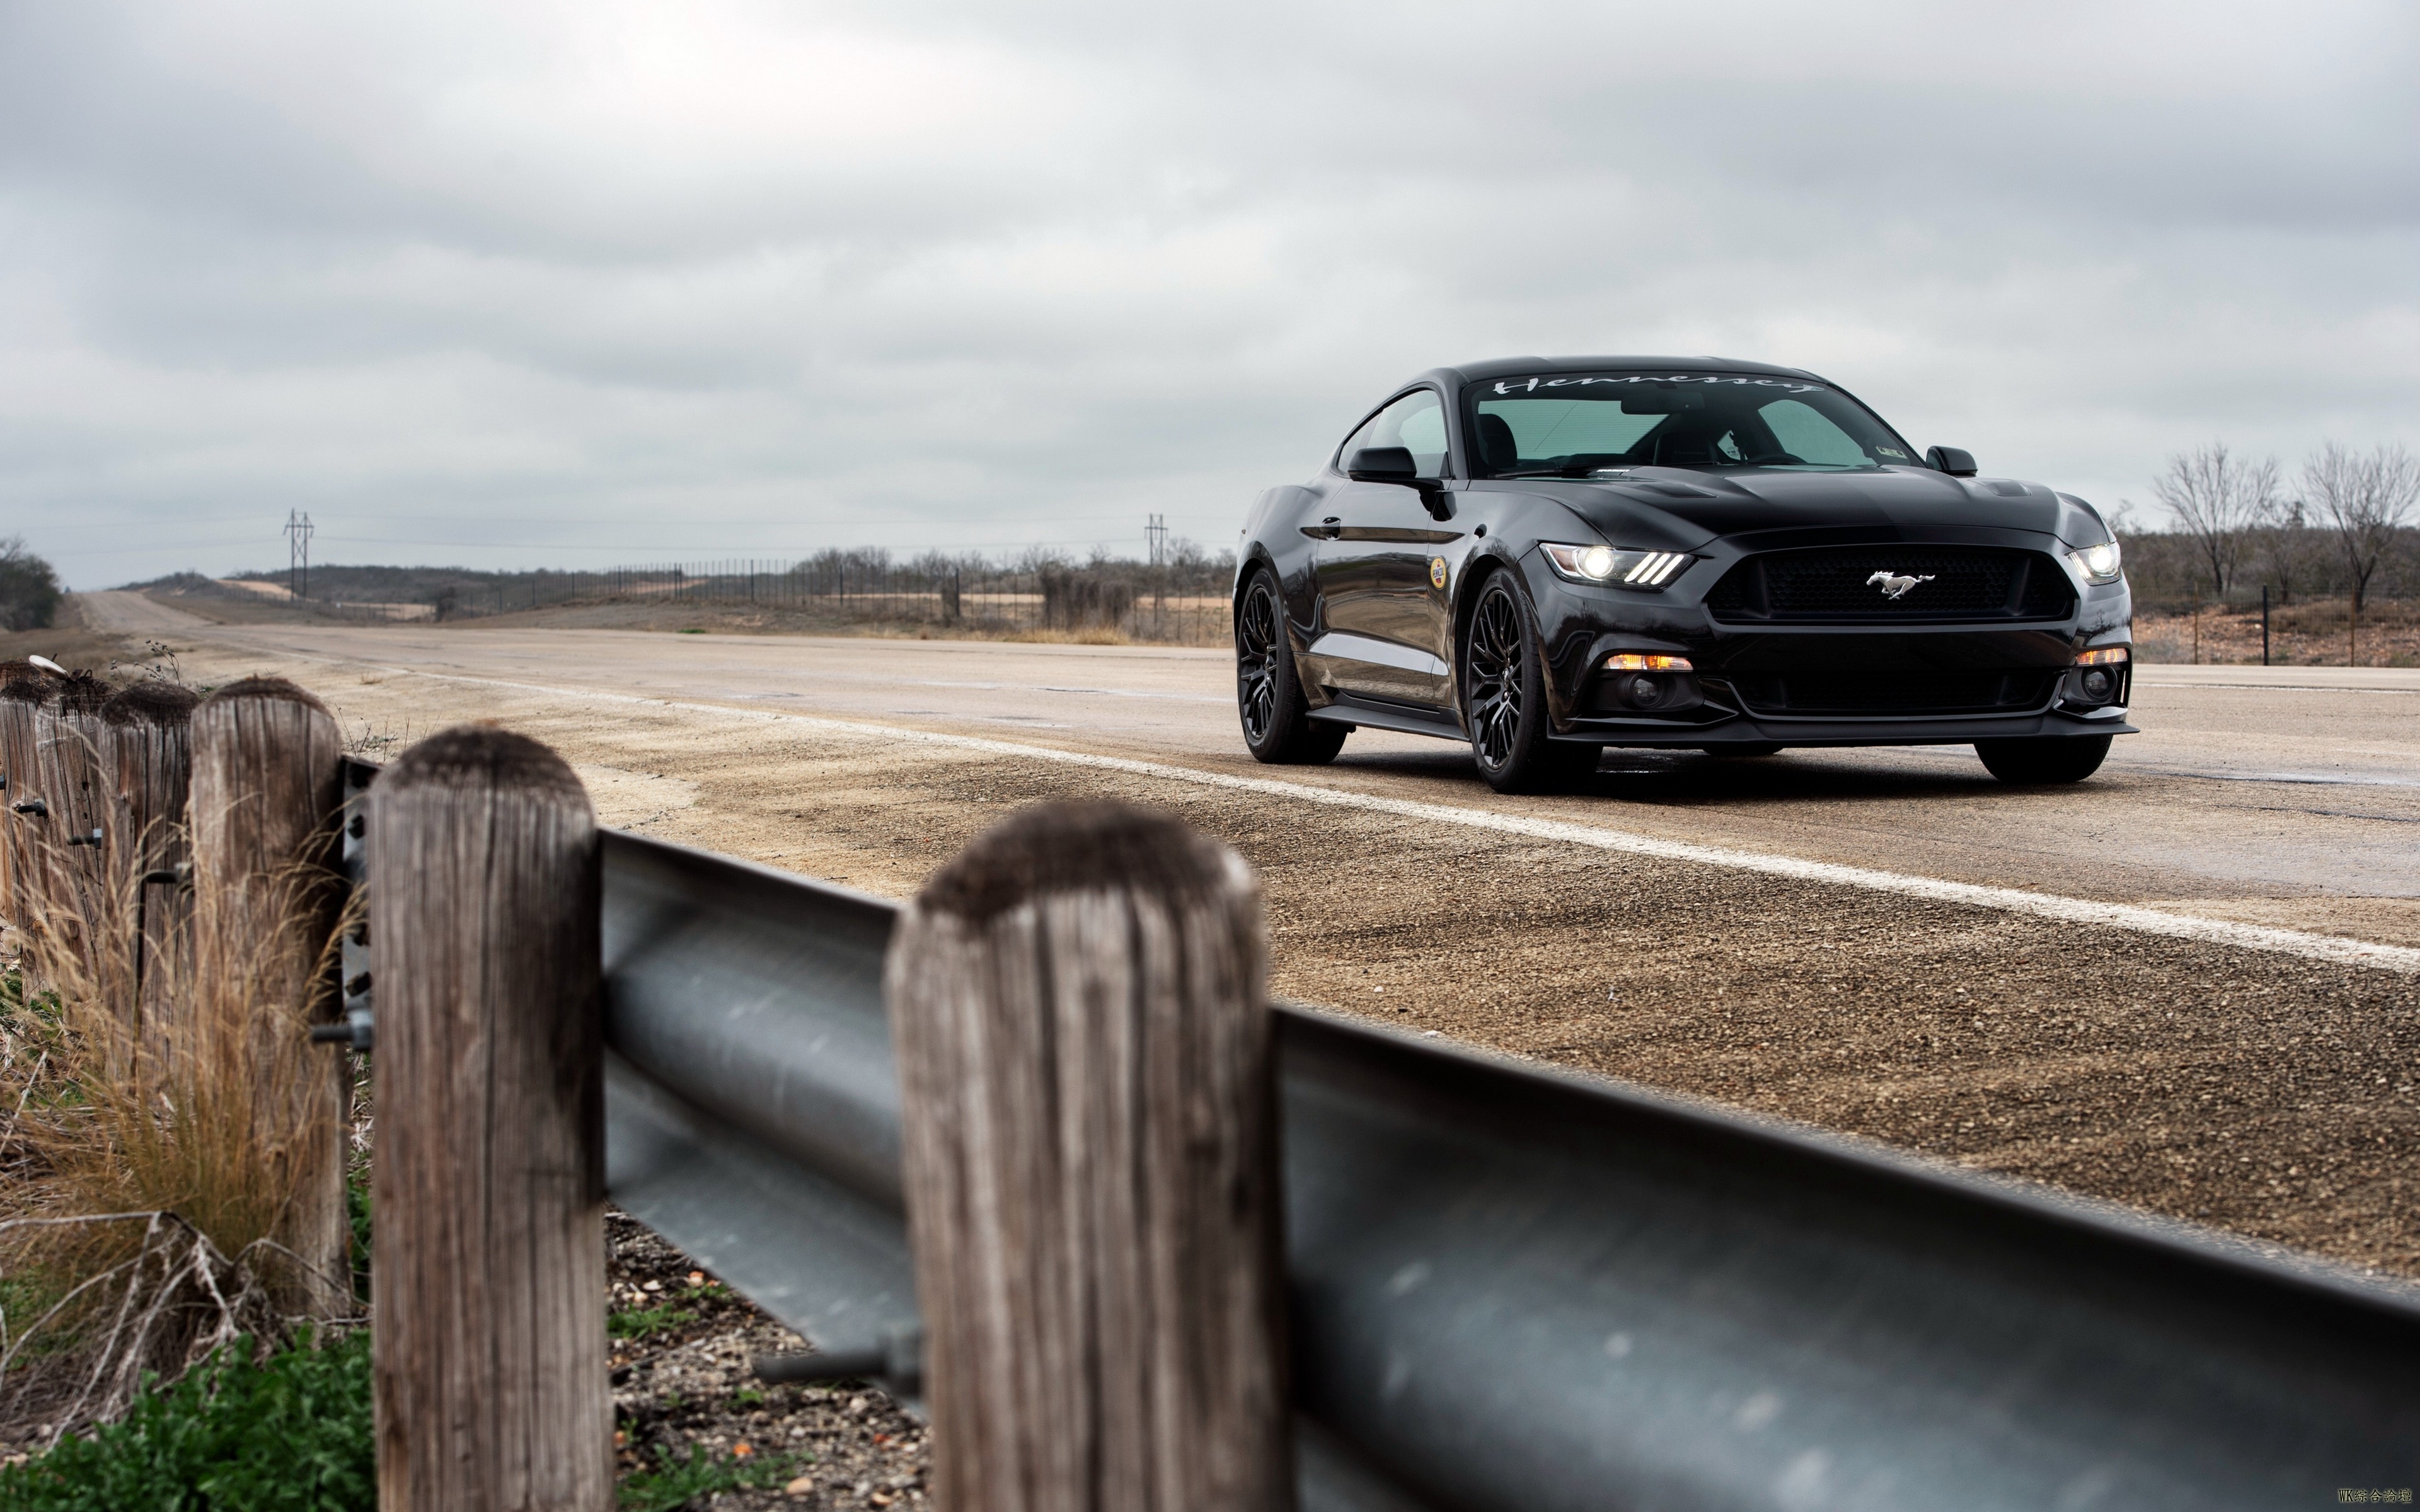 ford_mustang_gt_hpe700_hennessey_102878_3840x2400.jpg